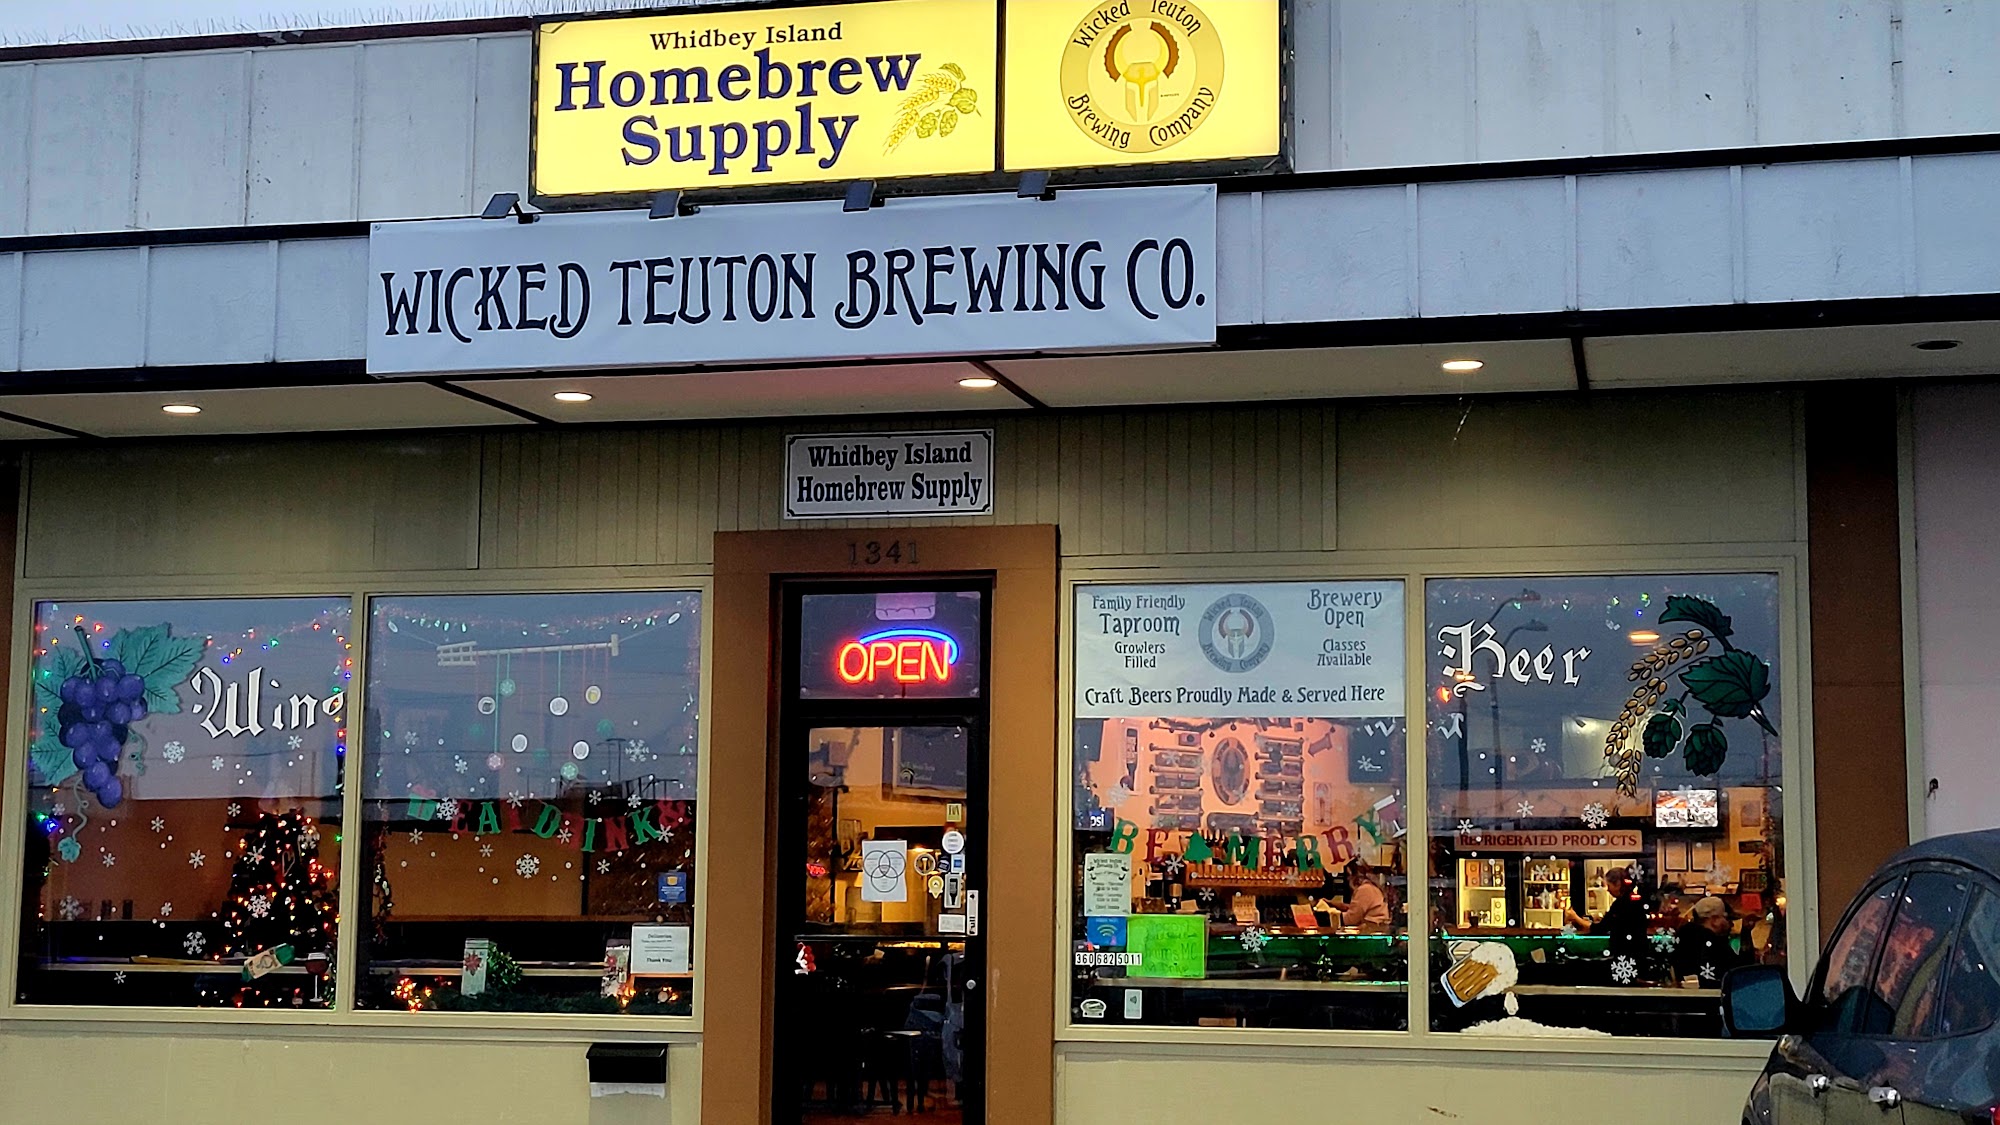 Wicked Teuton Brewing Company